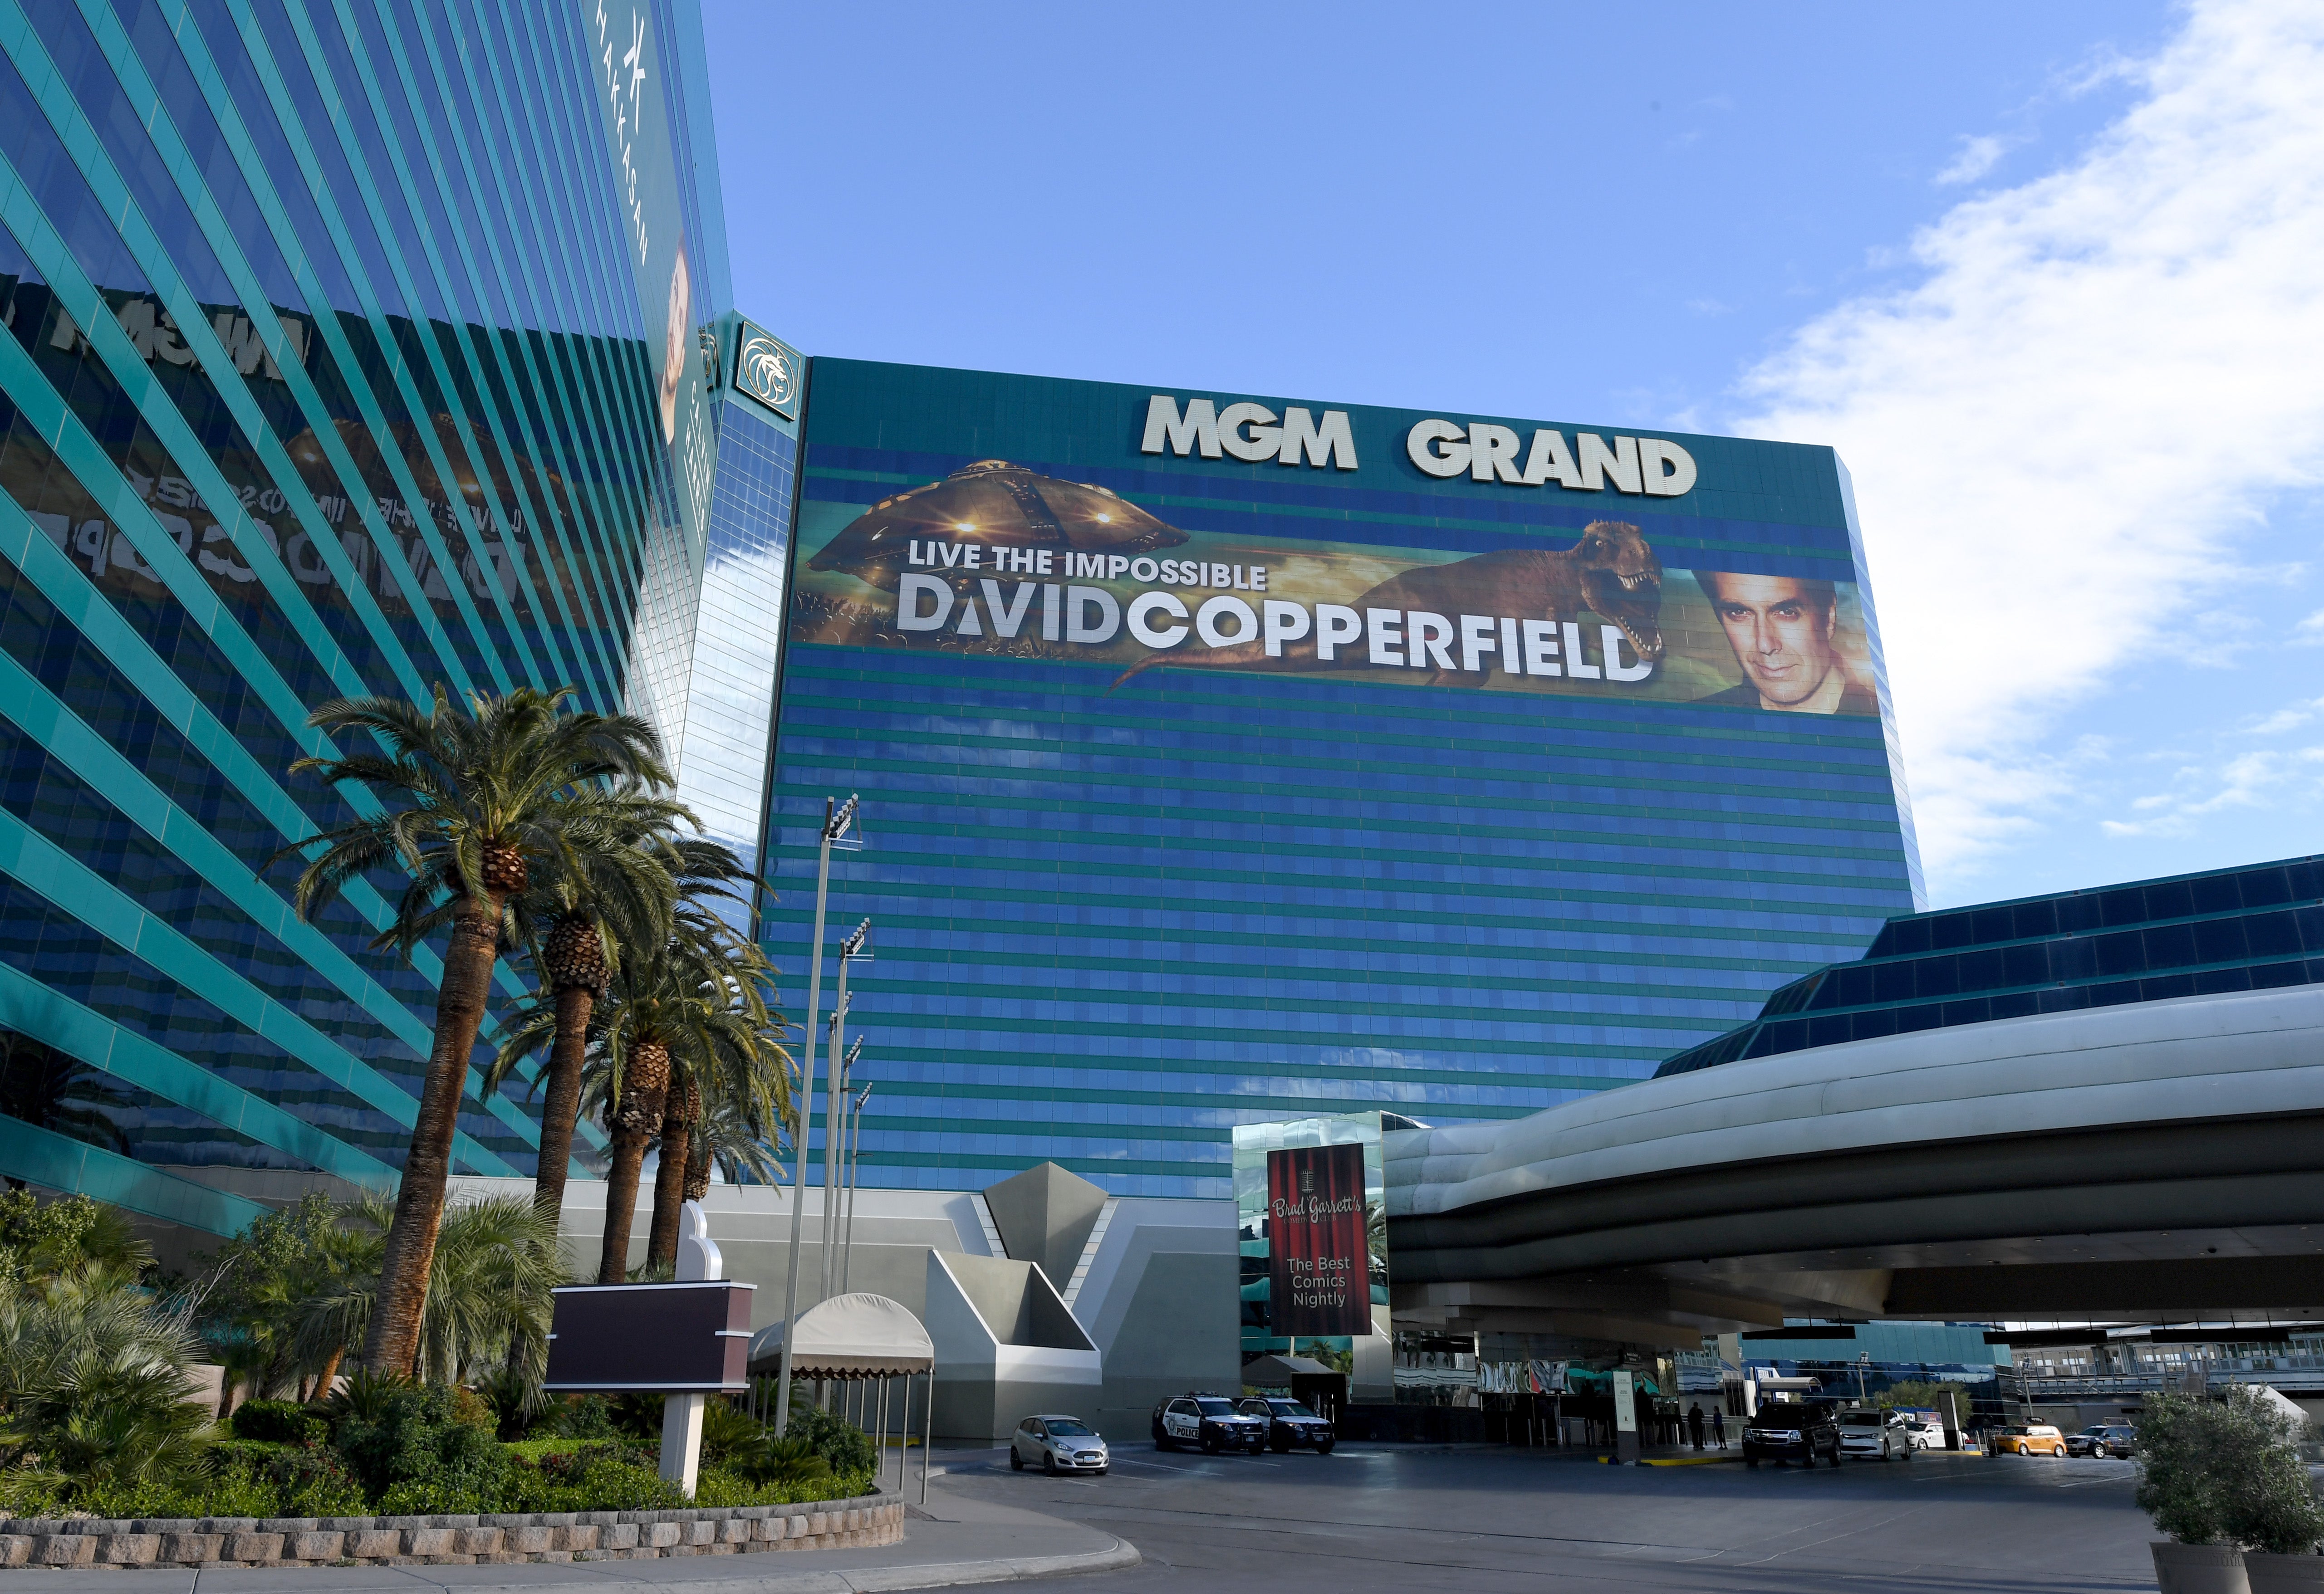 Some of David Copperfield’s alleged abuse happened at the MGM Grand in Las Vegas, Nevada, where he has frequently performed